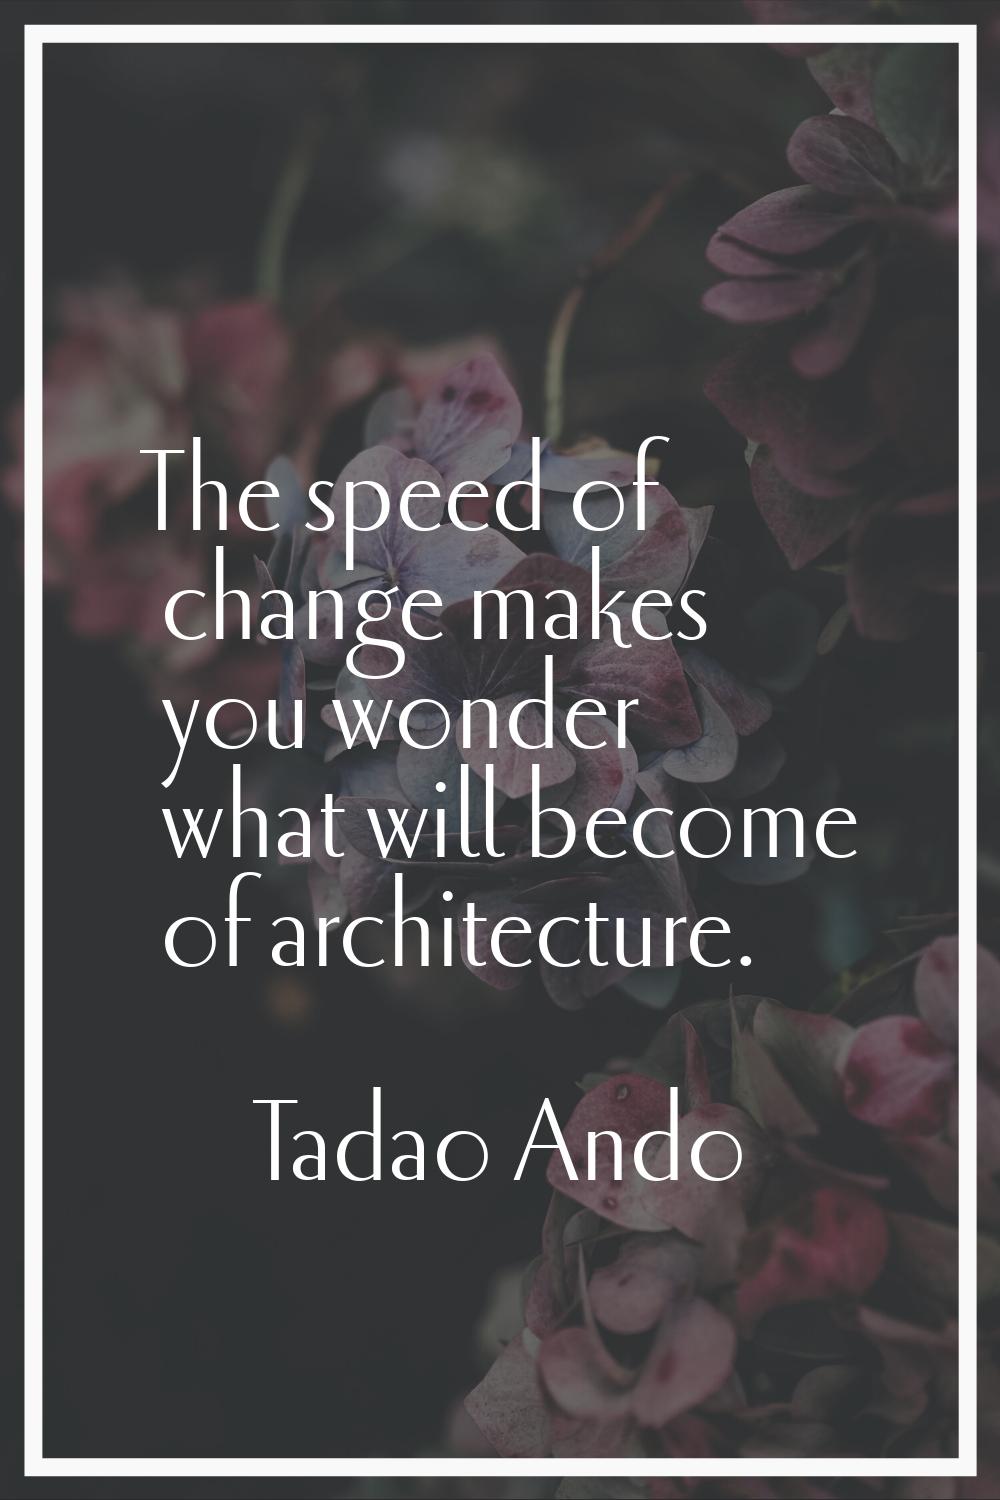 The speed of change makes you wonder what will become of architecture.